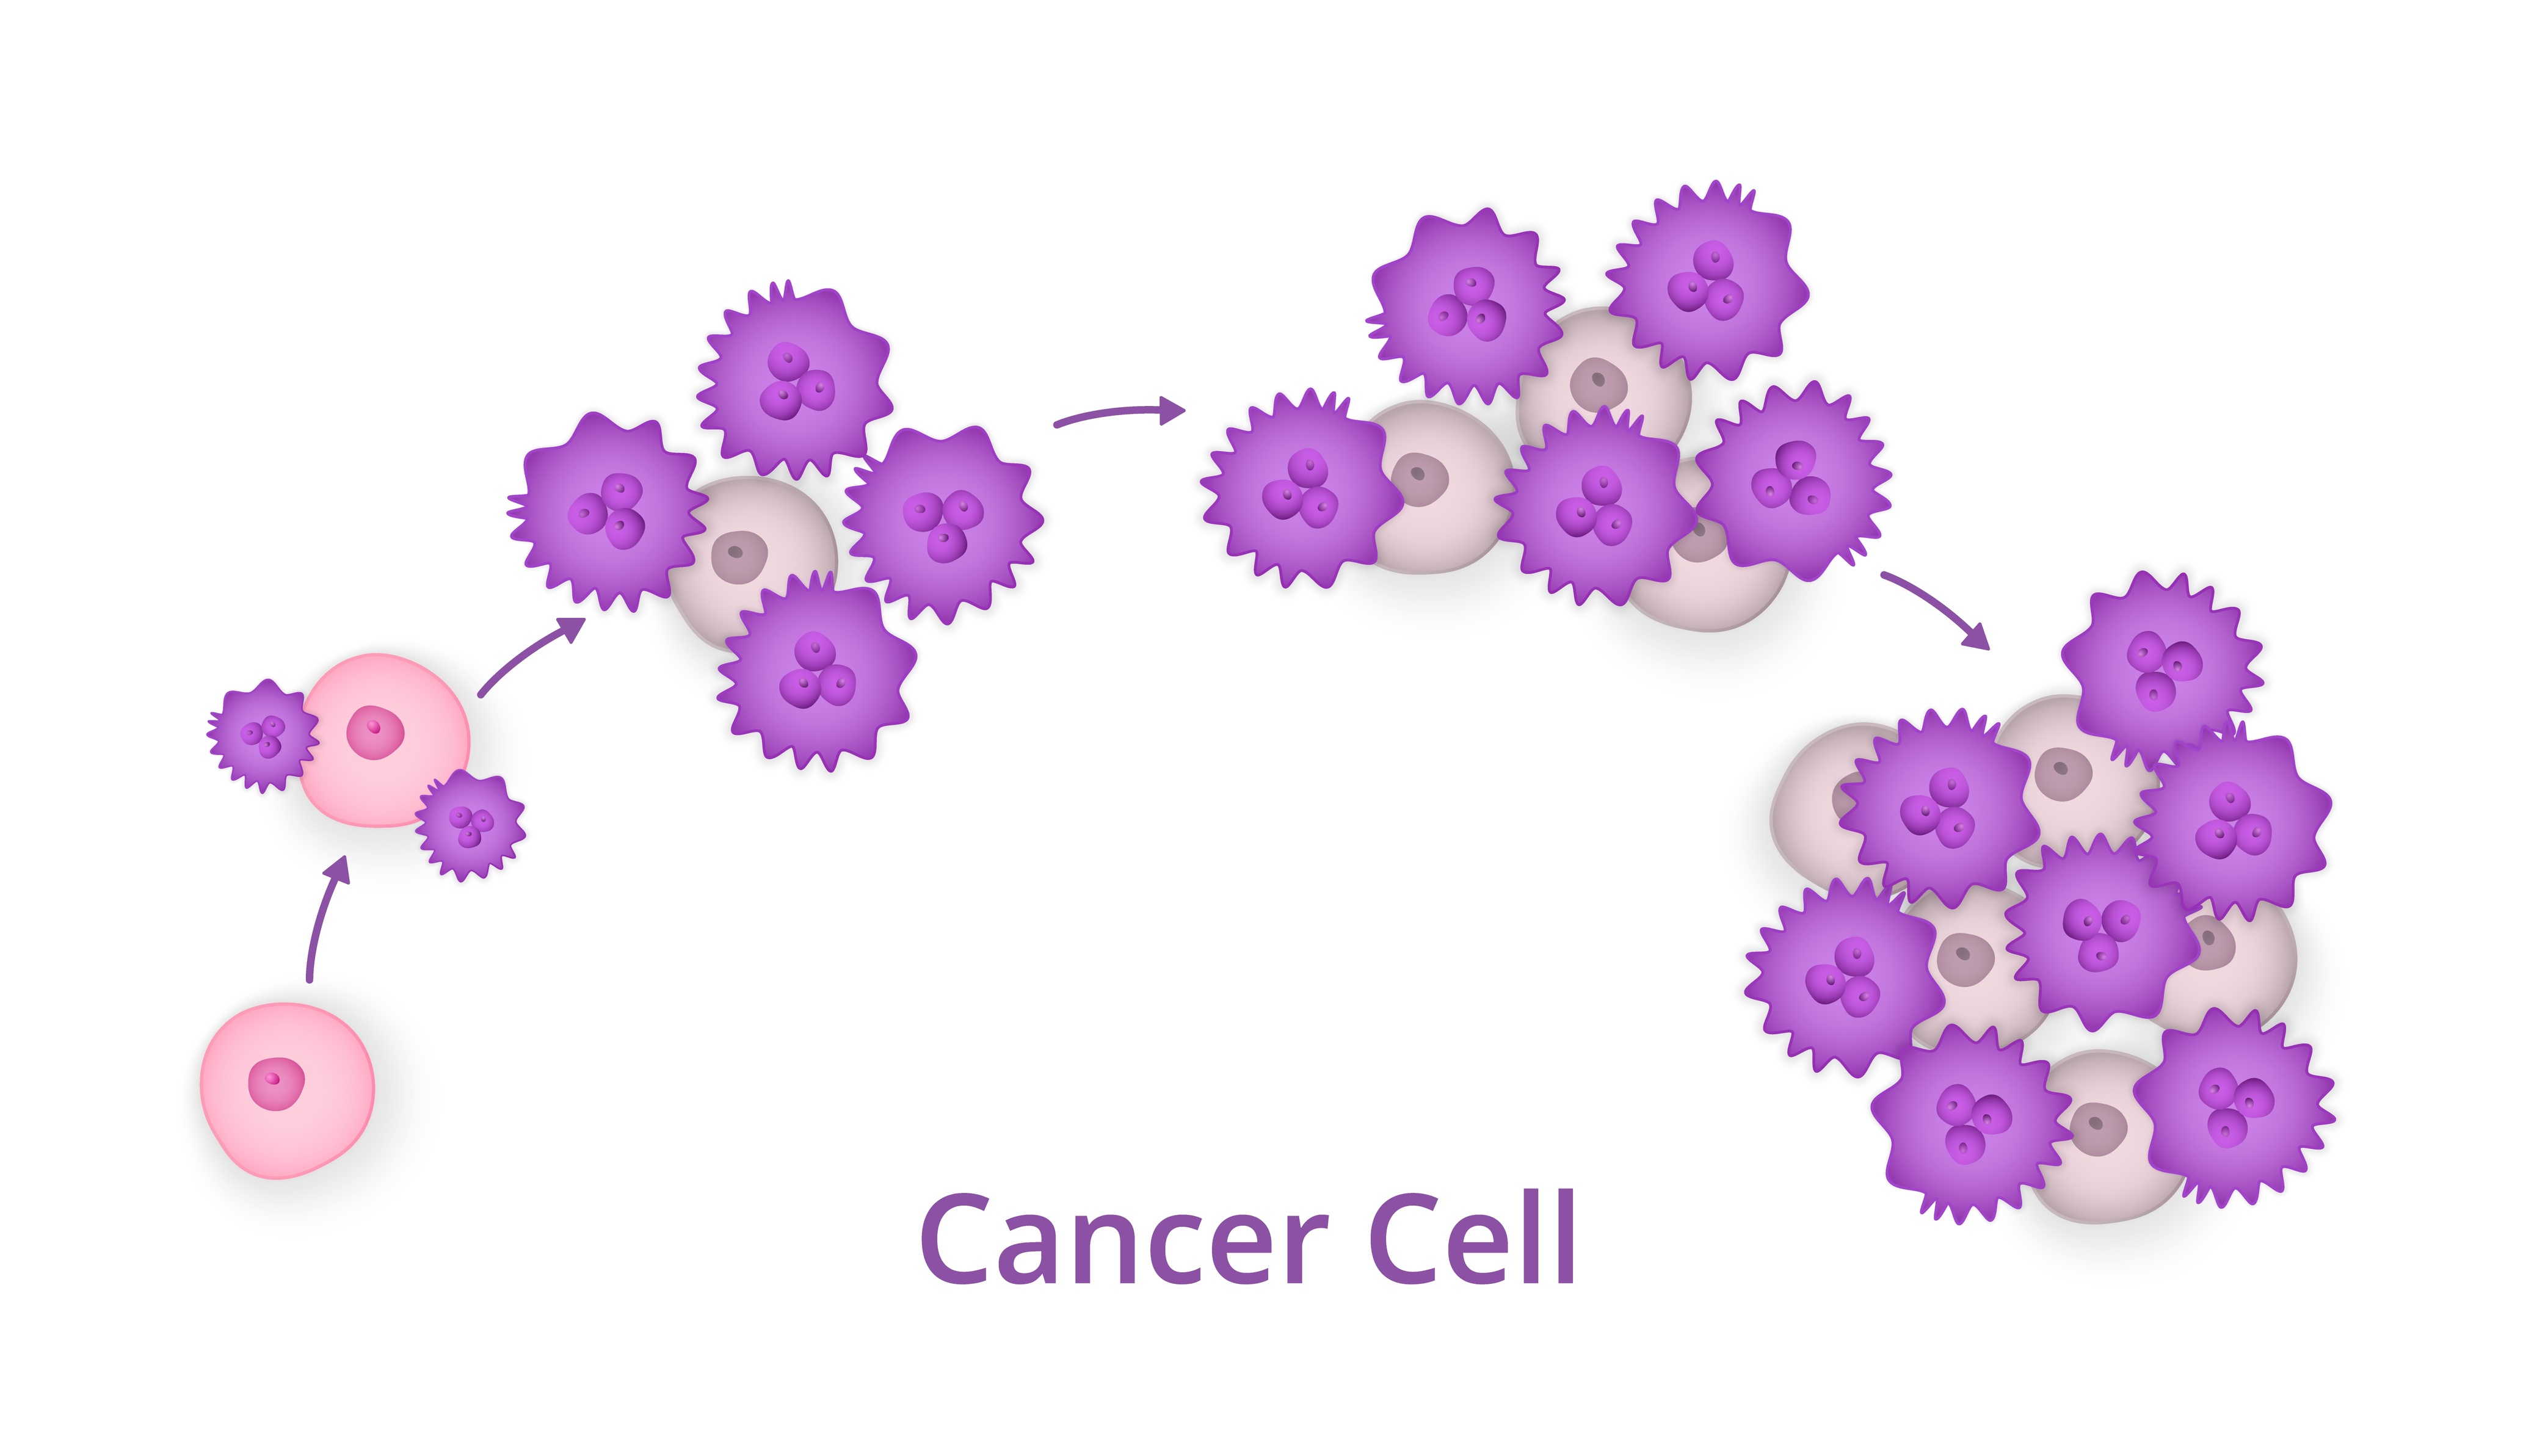 Illustration of cancer cell growing